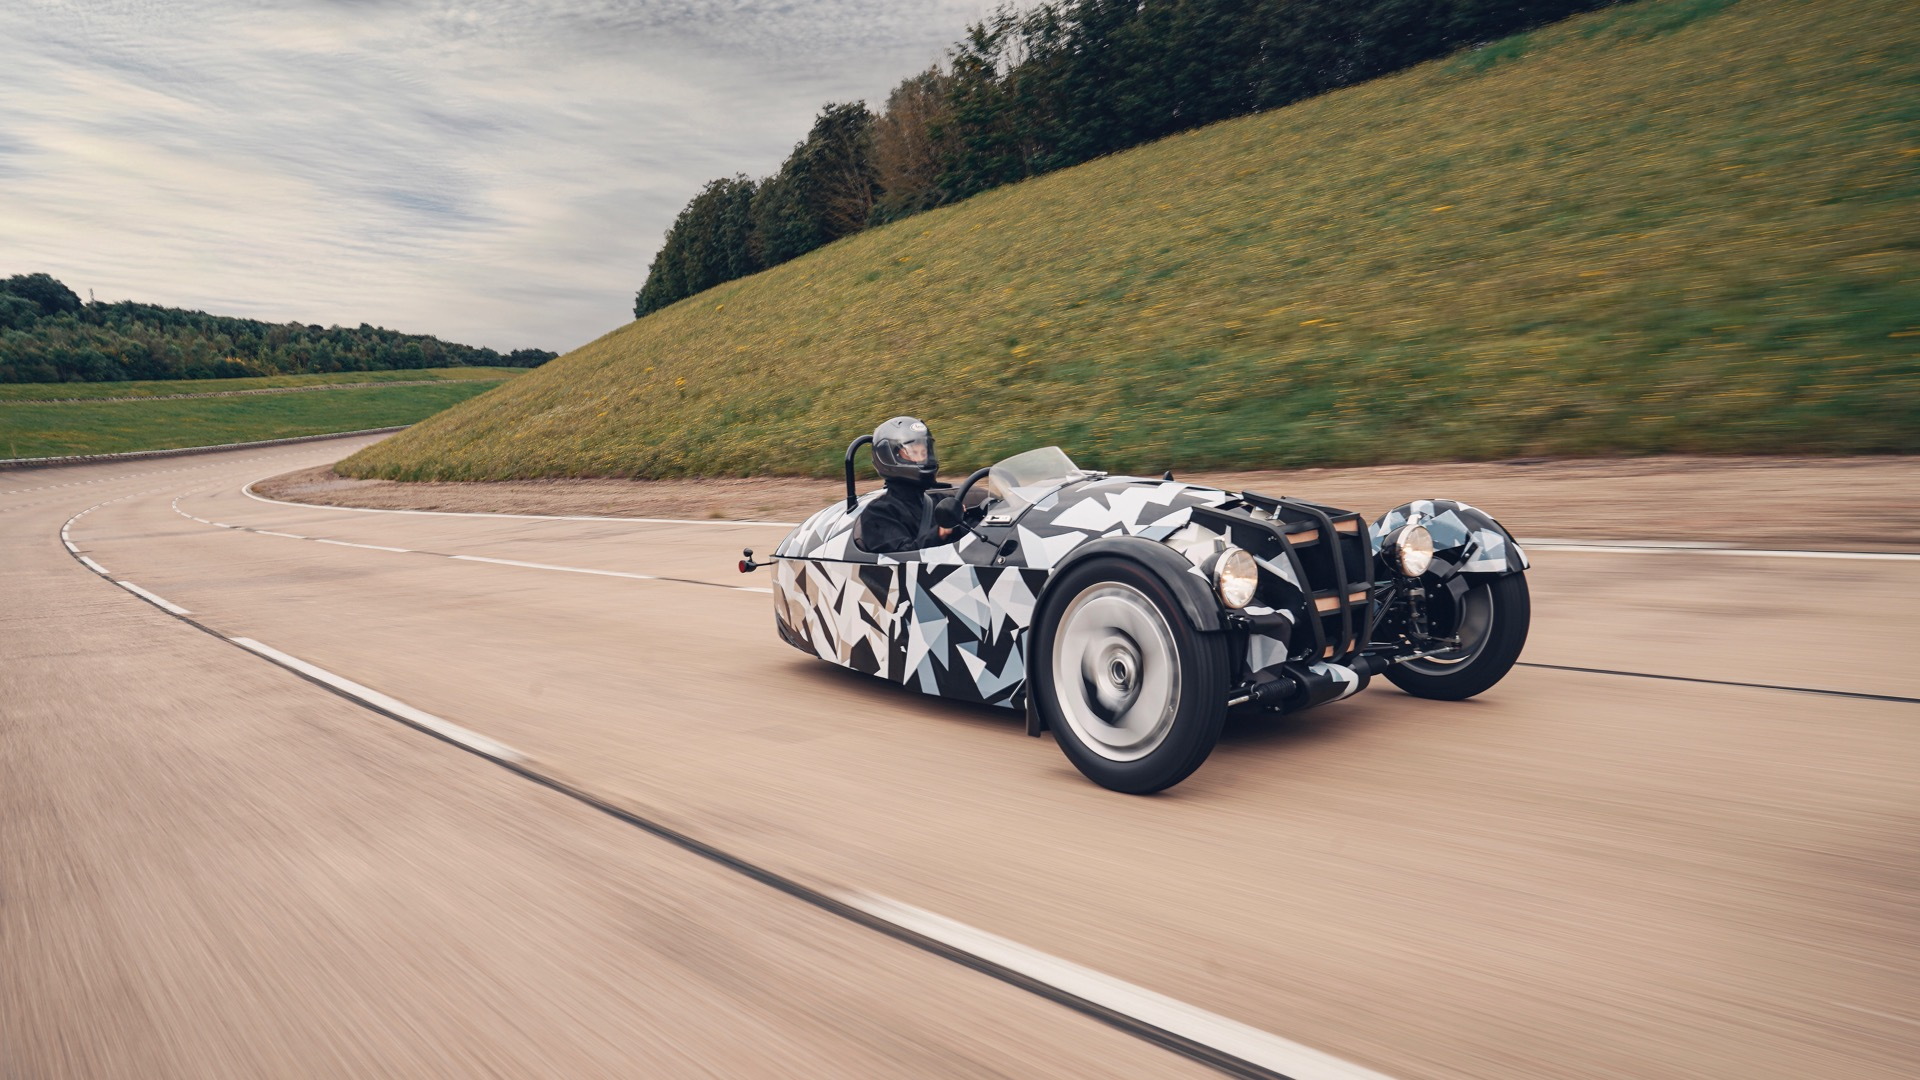 Teaser for new three-wheeled Morgan due in 2022